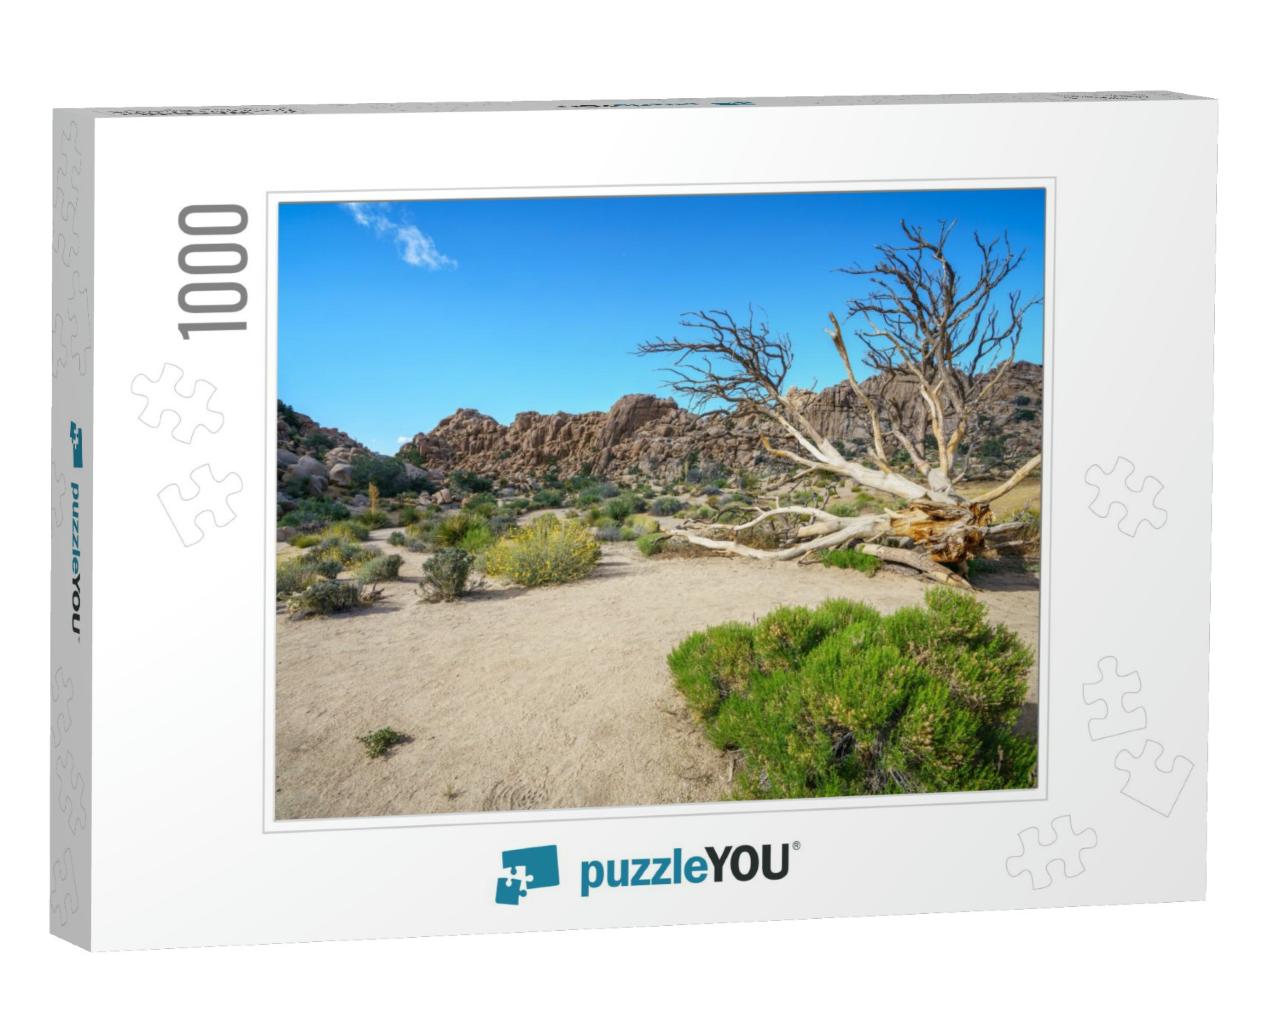 Hiking the Hidden Valley Trail in Joshua Tree National Pa... Jigsaw Puzzle with 1000 pieces